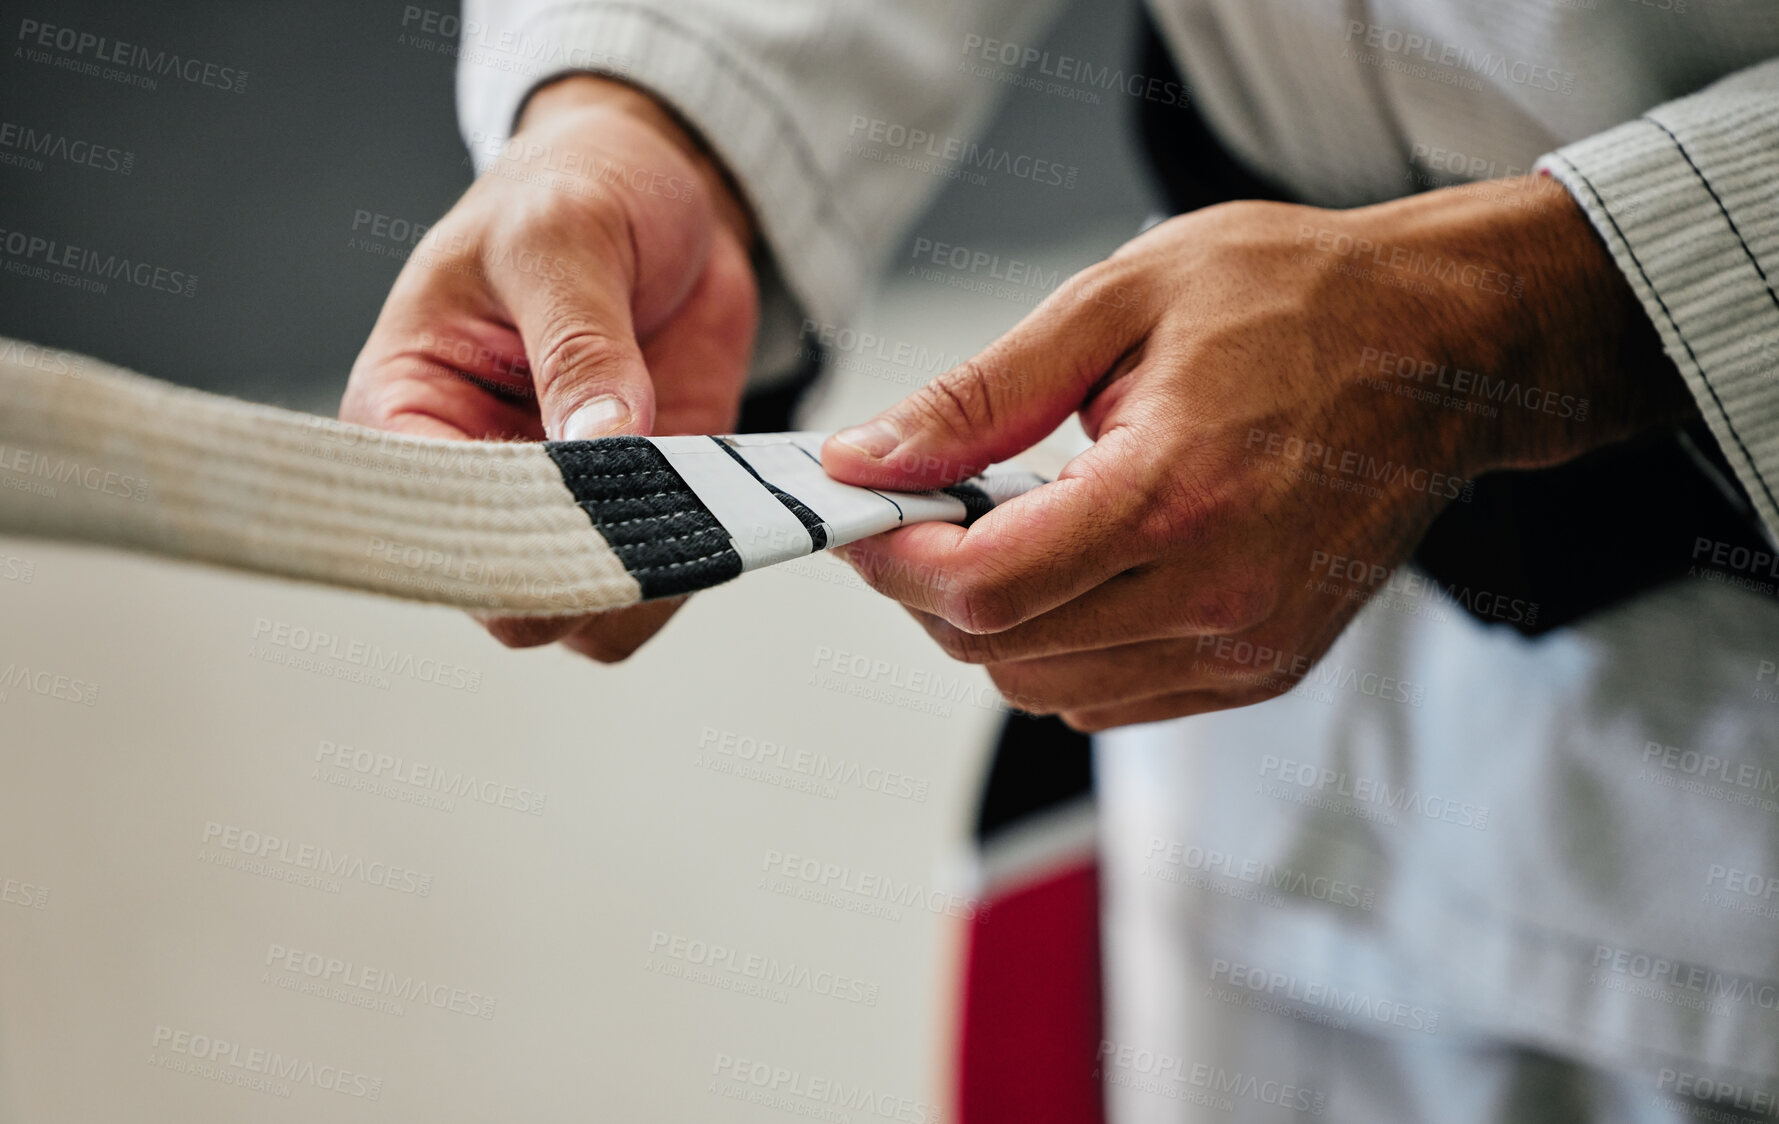 Buy stock photo Fitness, training and karate teacher hands prepare uniform for new student at a center or dojo. Martial arts sensei getting ready to lead a lesson on self defense, speed and physical endurance